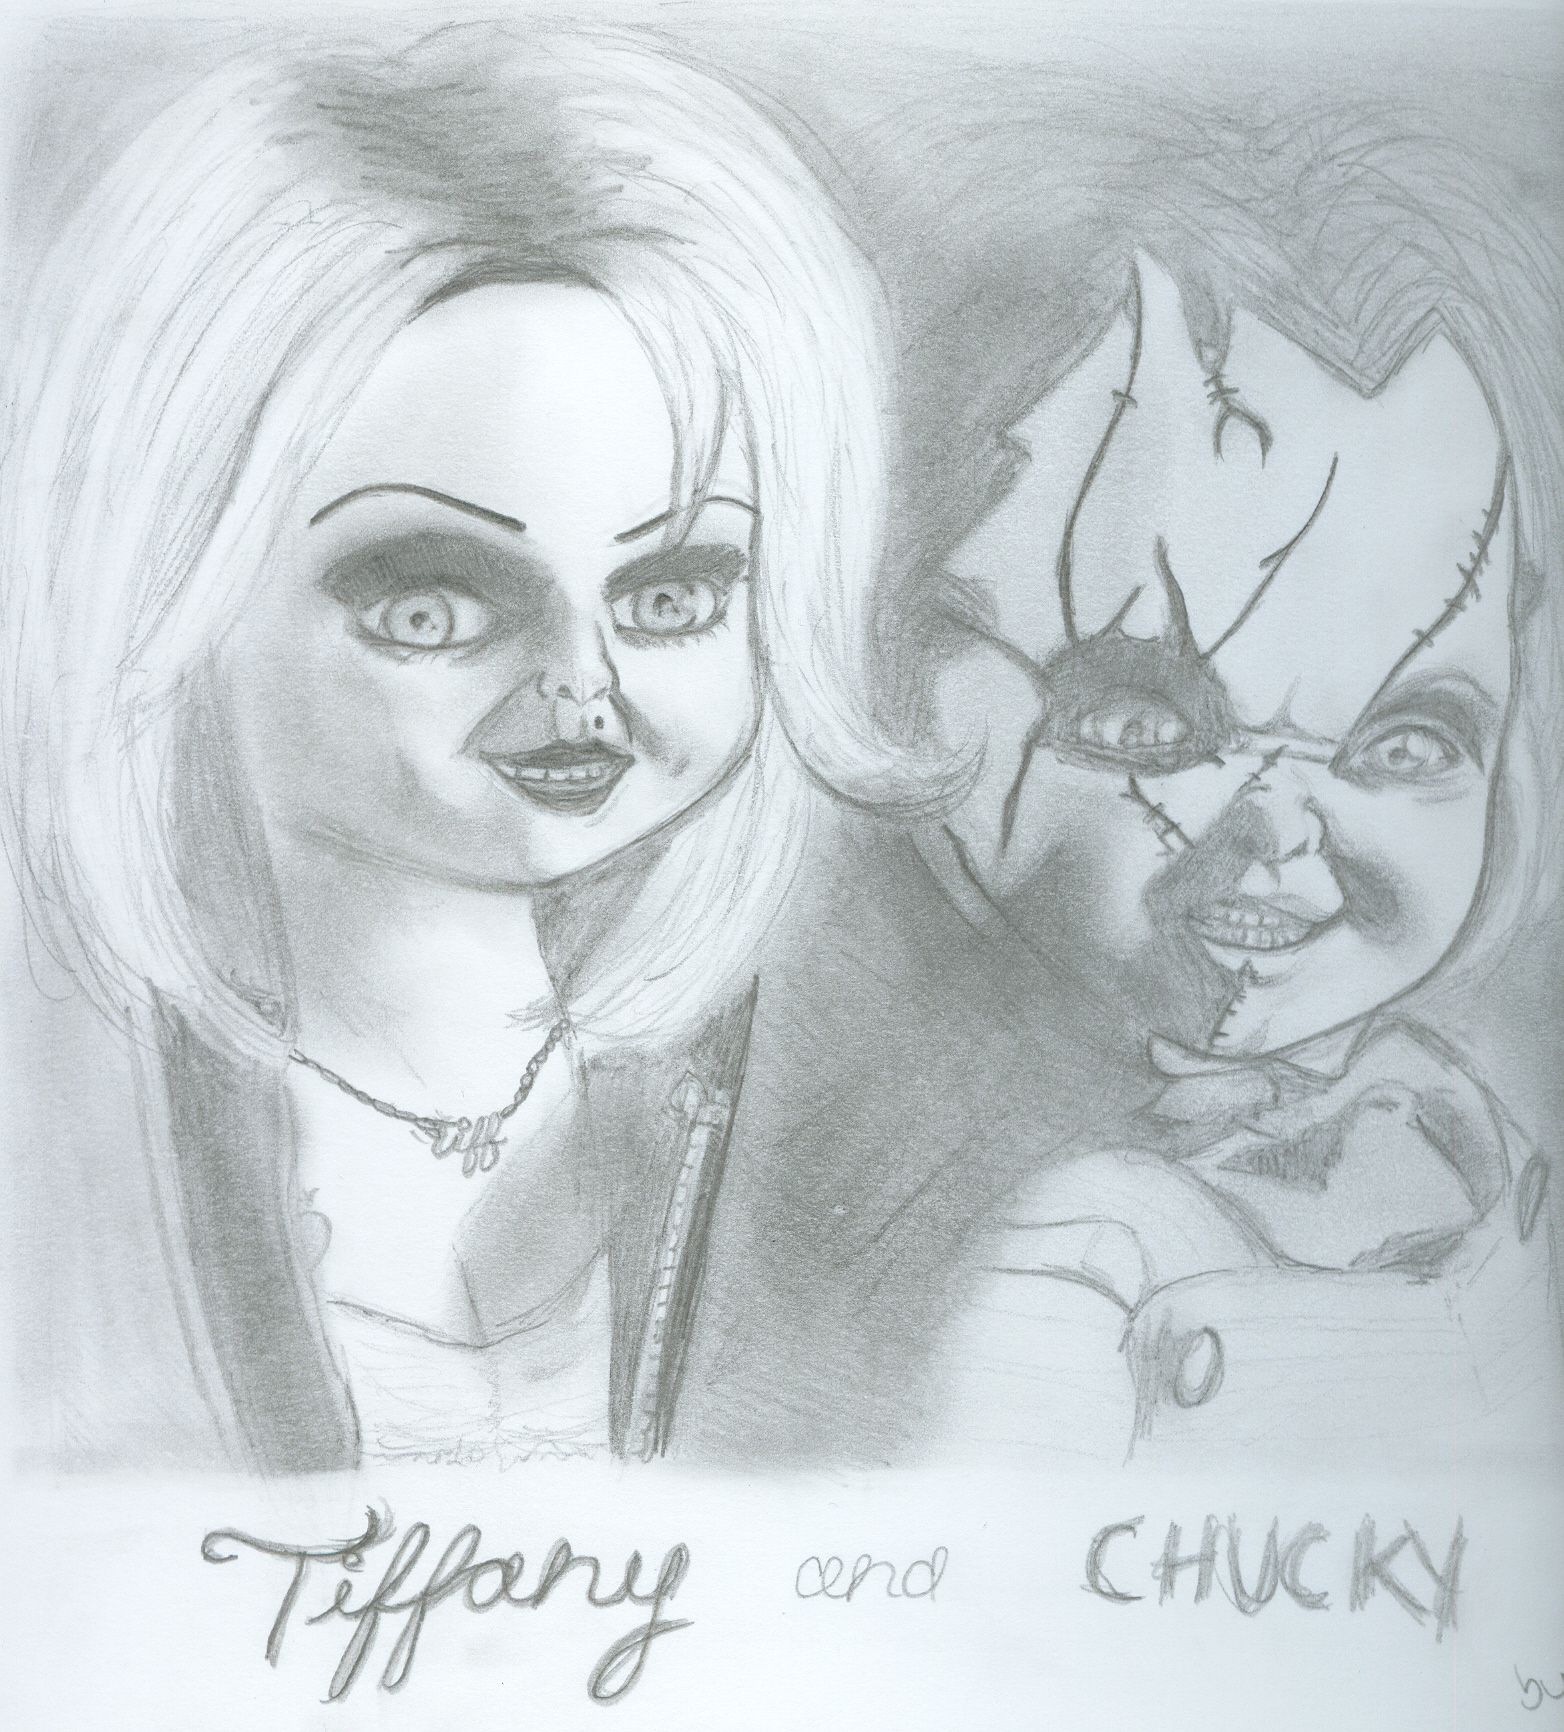 1564x1732 Image Result For Chucky And Tiffany Drawings Eye Draw.